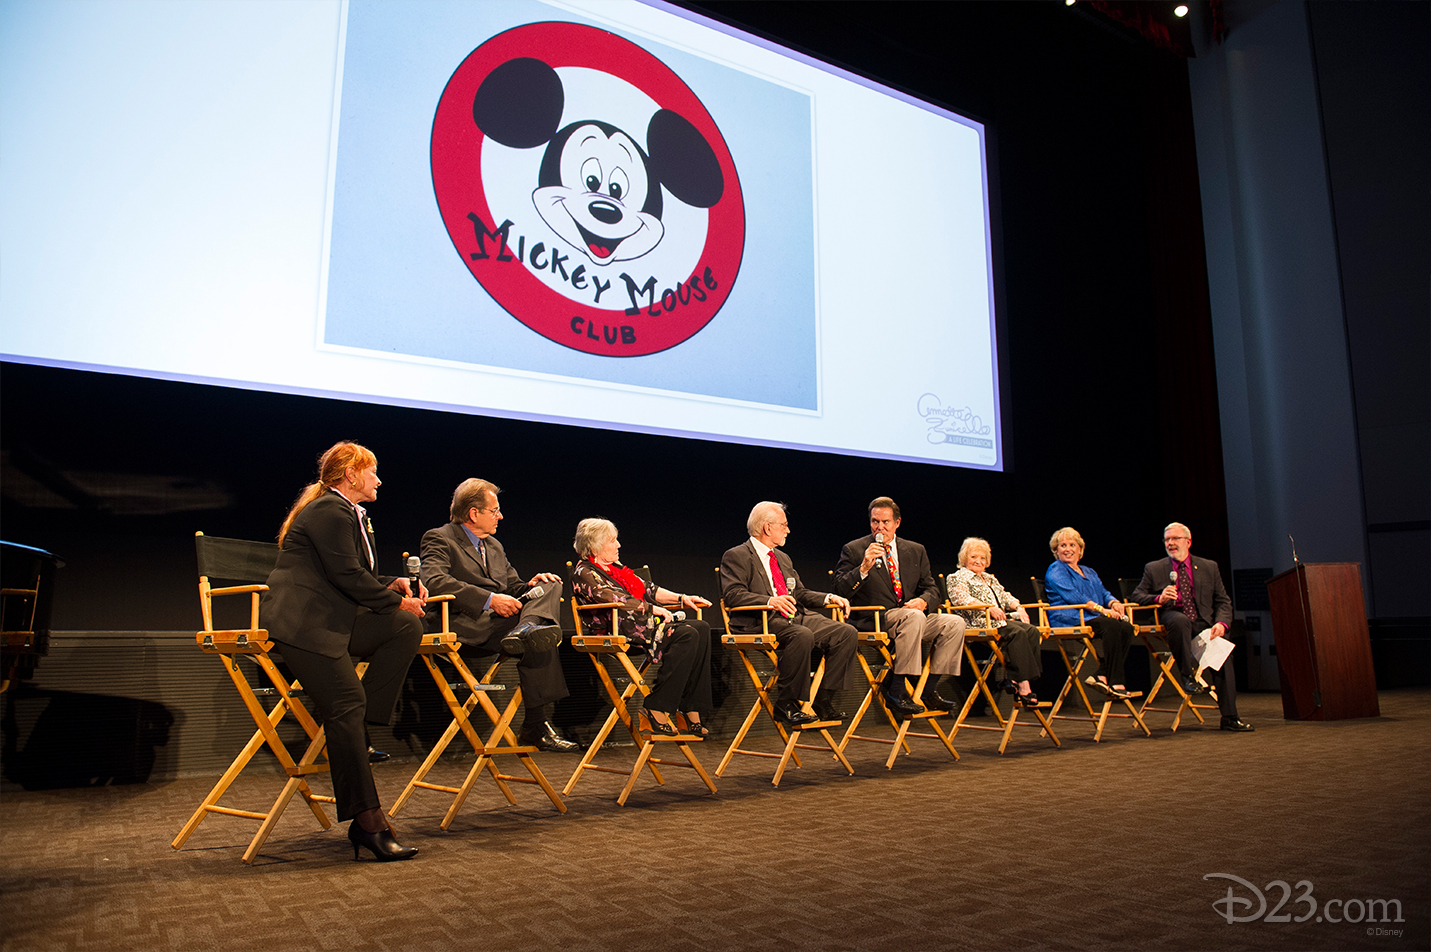 During the “Annette Funicello: A Life Celebration” that immediately followed the dedication, original Mouseketeers gathered to share their fondest memories of Annette on a panel hosted by Leonard Maltin.